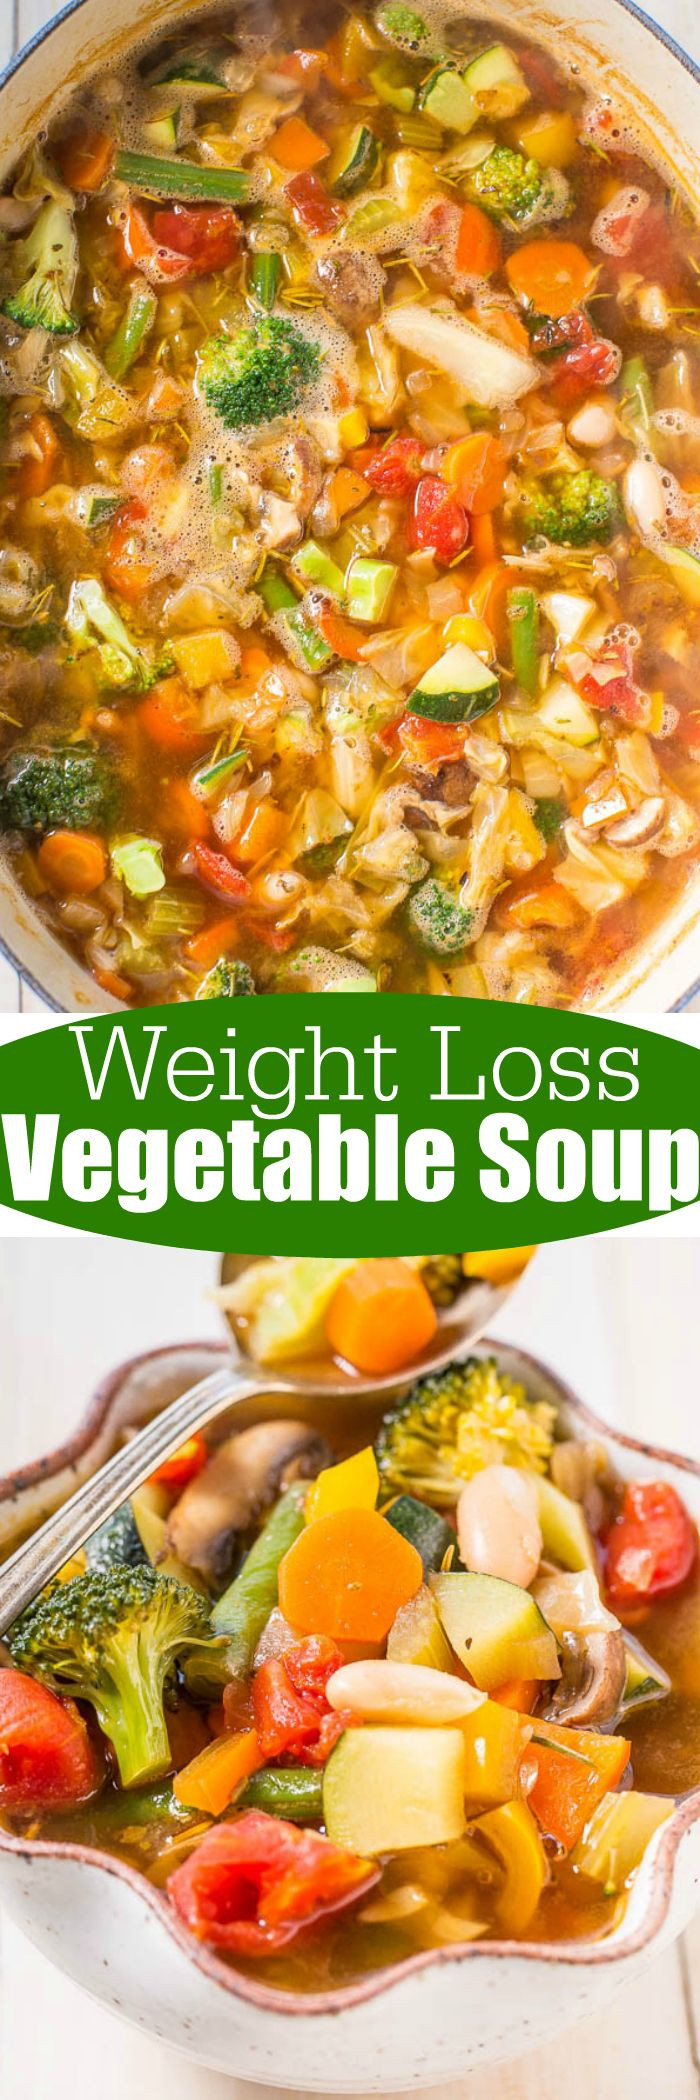 Healthy Vegetable Recipes For Weight Loss
 Weight Loss Ve able Soup Recipe